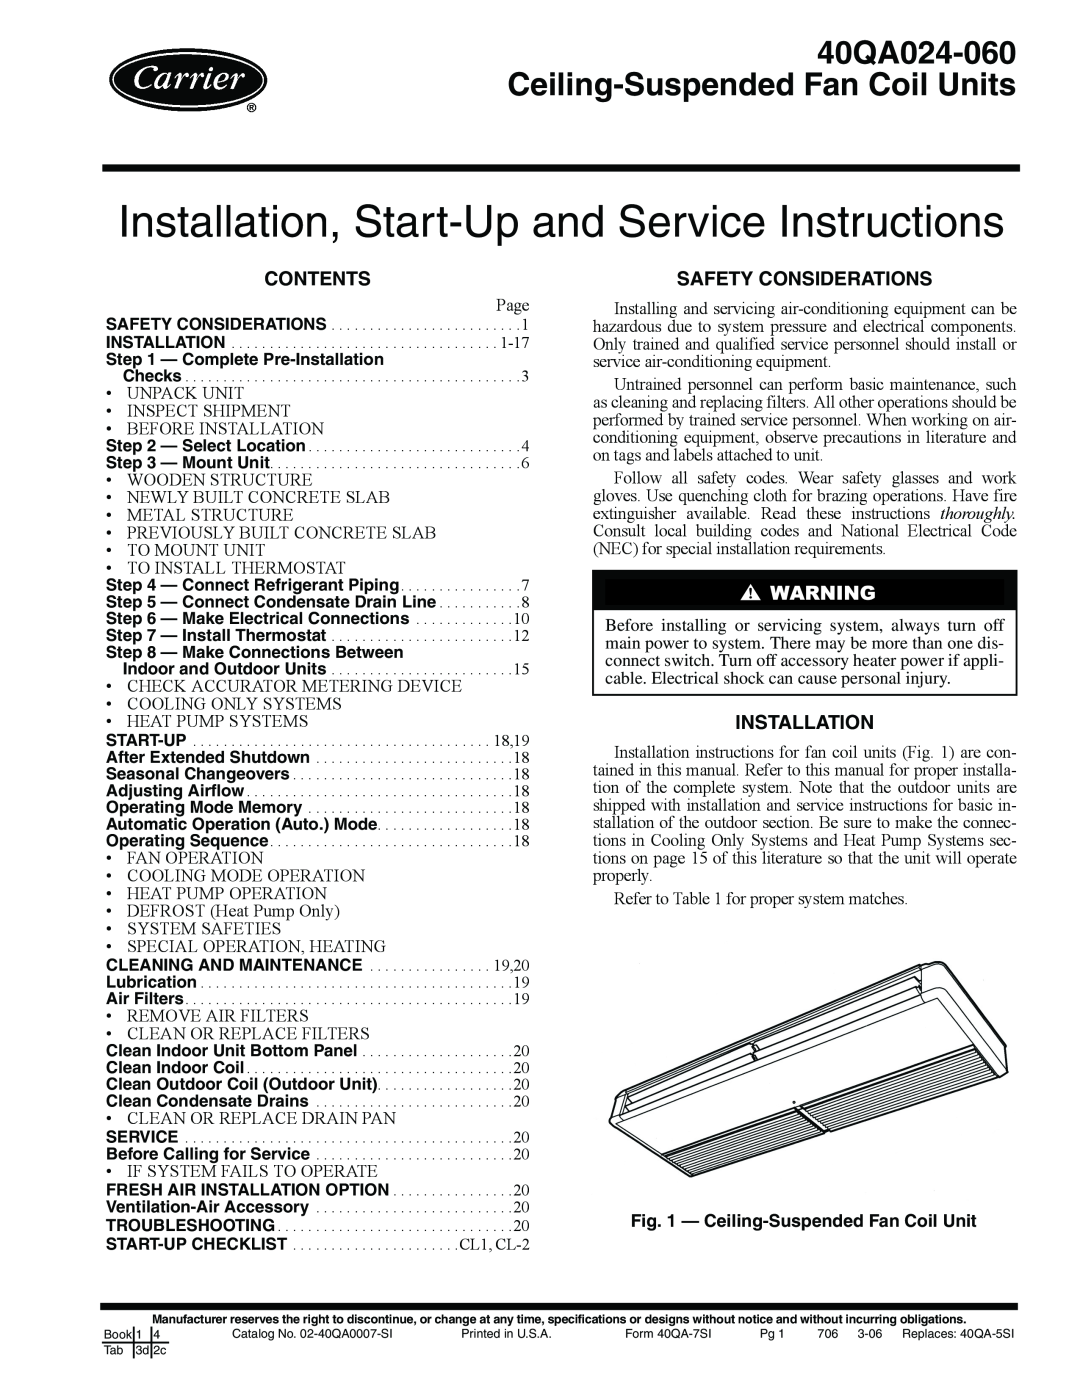 Carrier 40QA024-060 specifications Contents, Complete Pre-Installation, Make Connections Between 